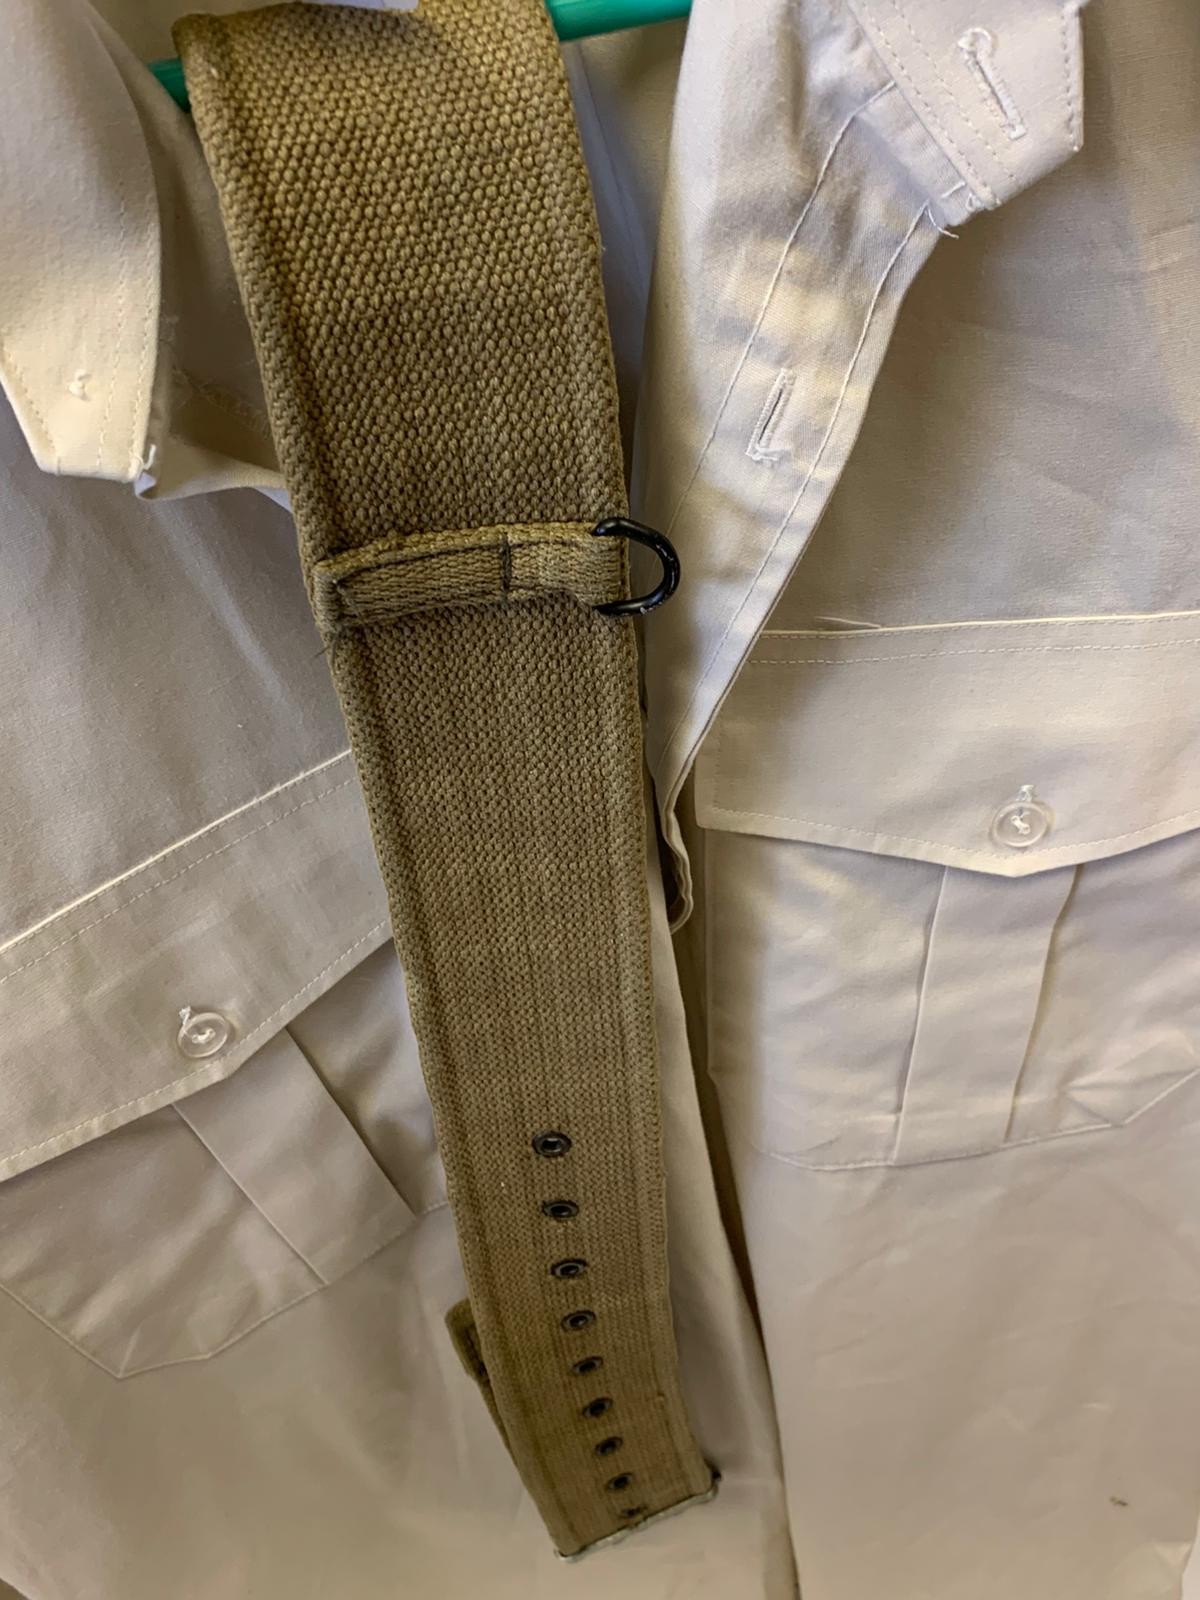 Queen regimental army issued shirt with khaki webbing belt - Image 3 of 4